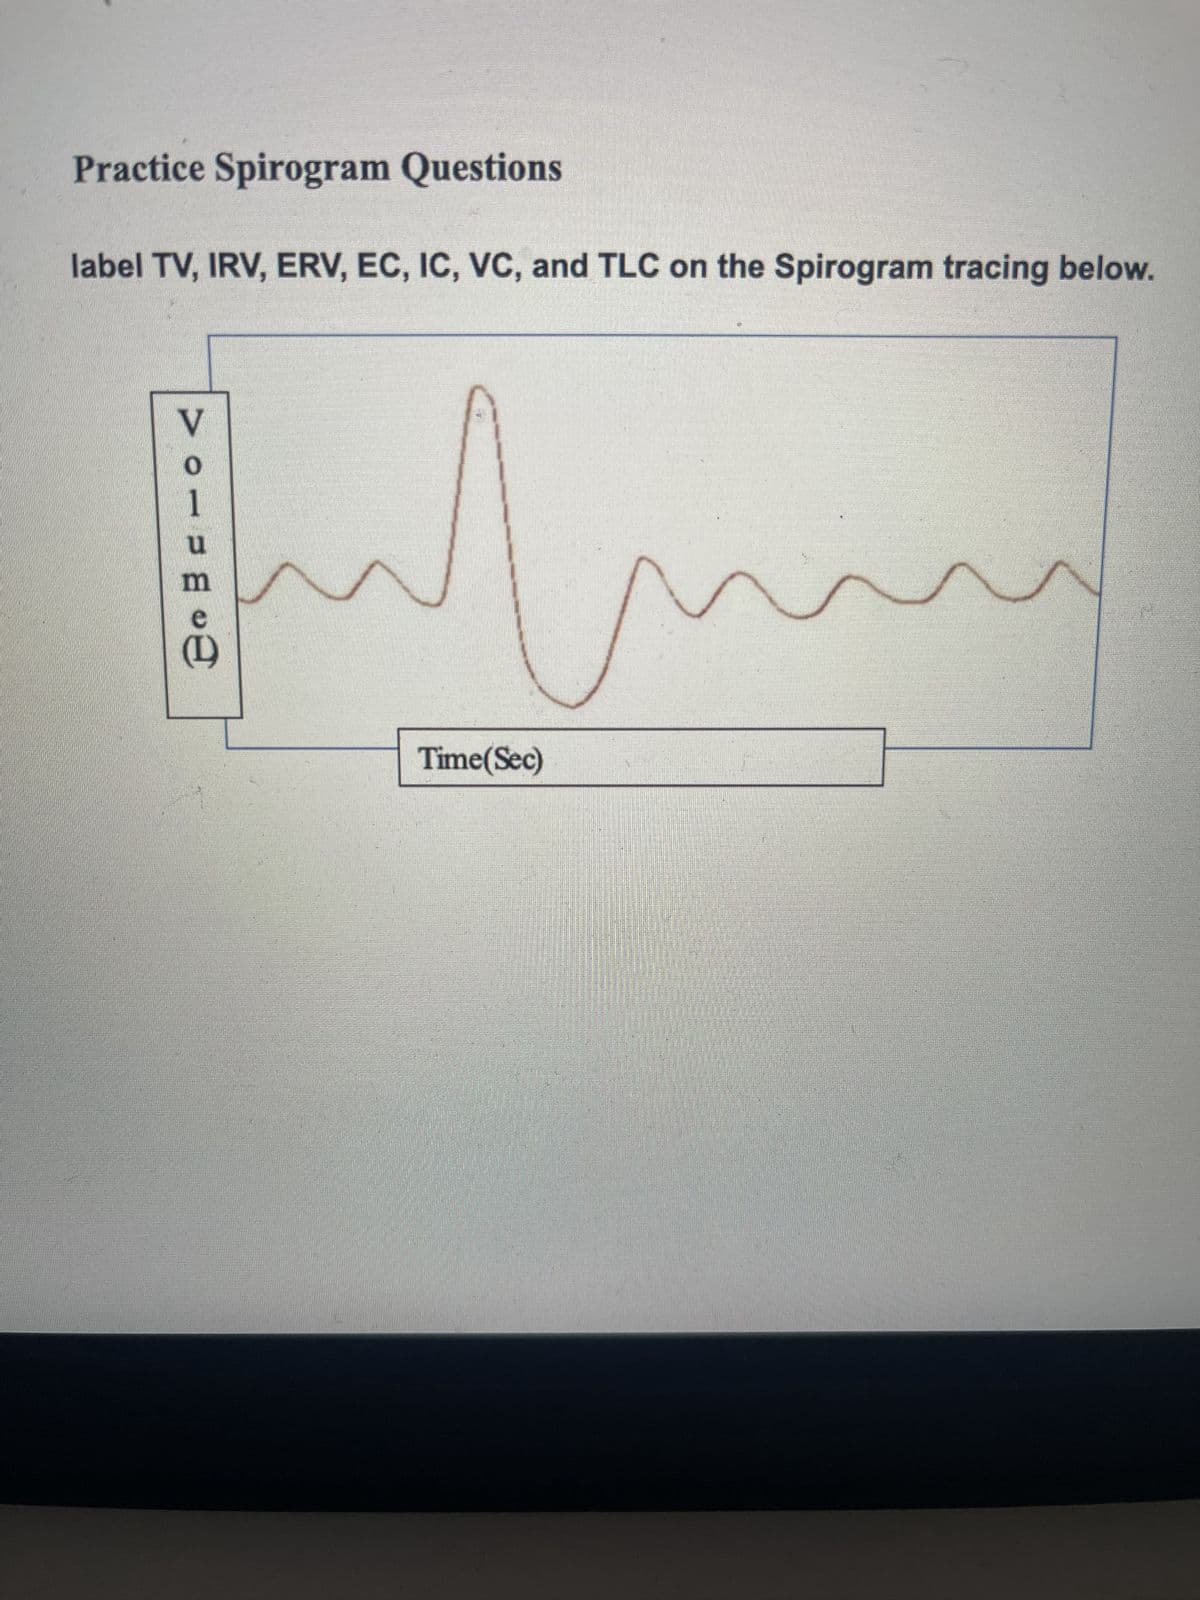 Practice Spirogram Questions
label TV, IRV, ERV, EC, IC, VC, and TLC on the Spirogram tracing below.
Do Bero <<
V
(D)
سالیہ
Time(Sec)